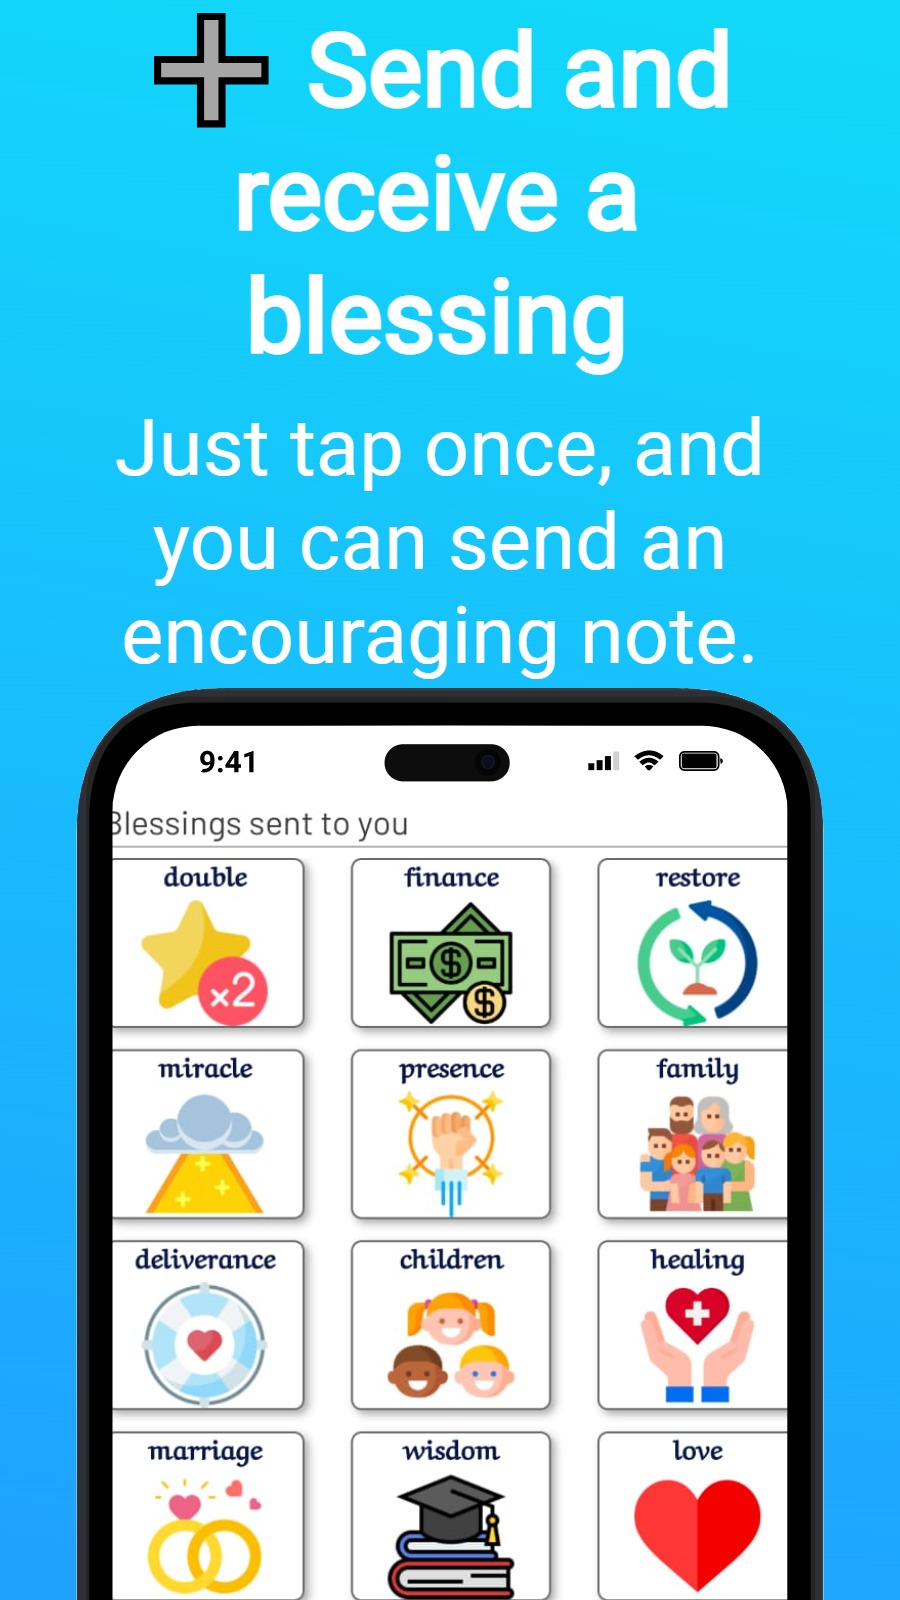 ➕ Send and receive a blessing - Just tap once, and you can send an encouraging note.